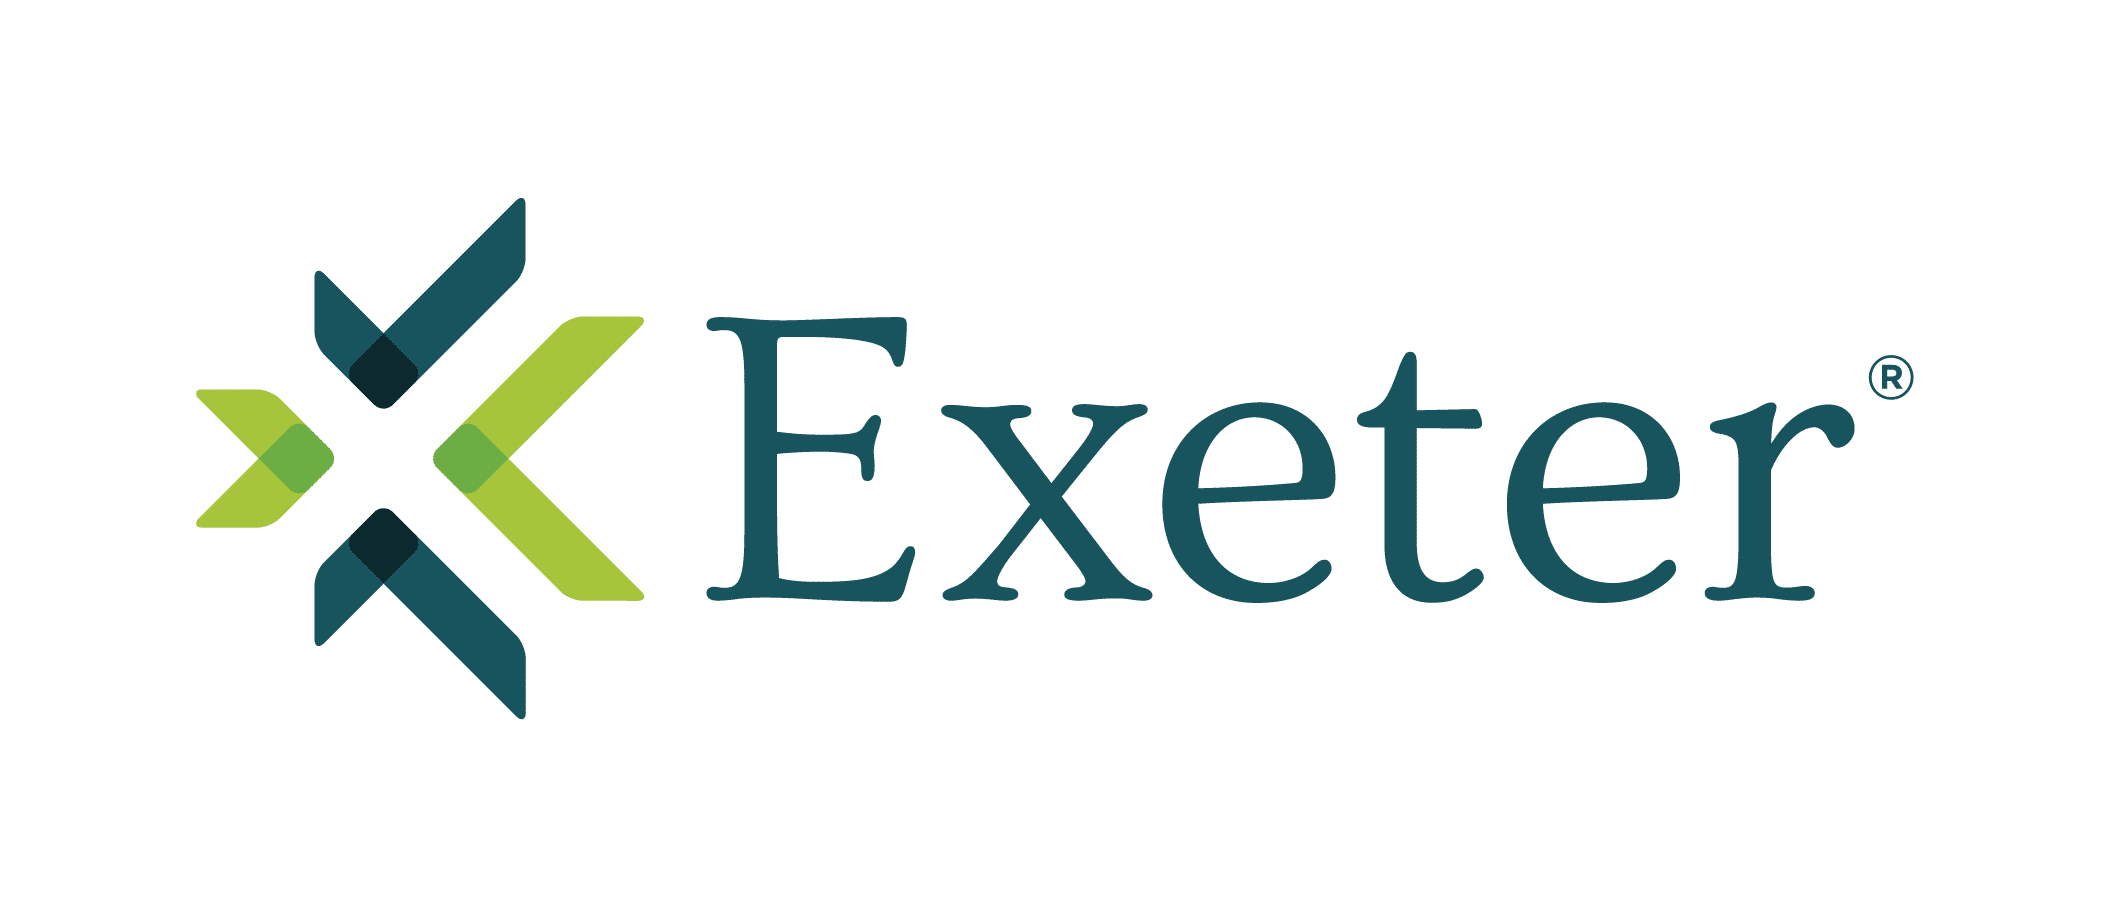 Exeter Finance Corp.